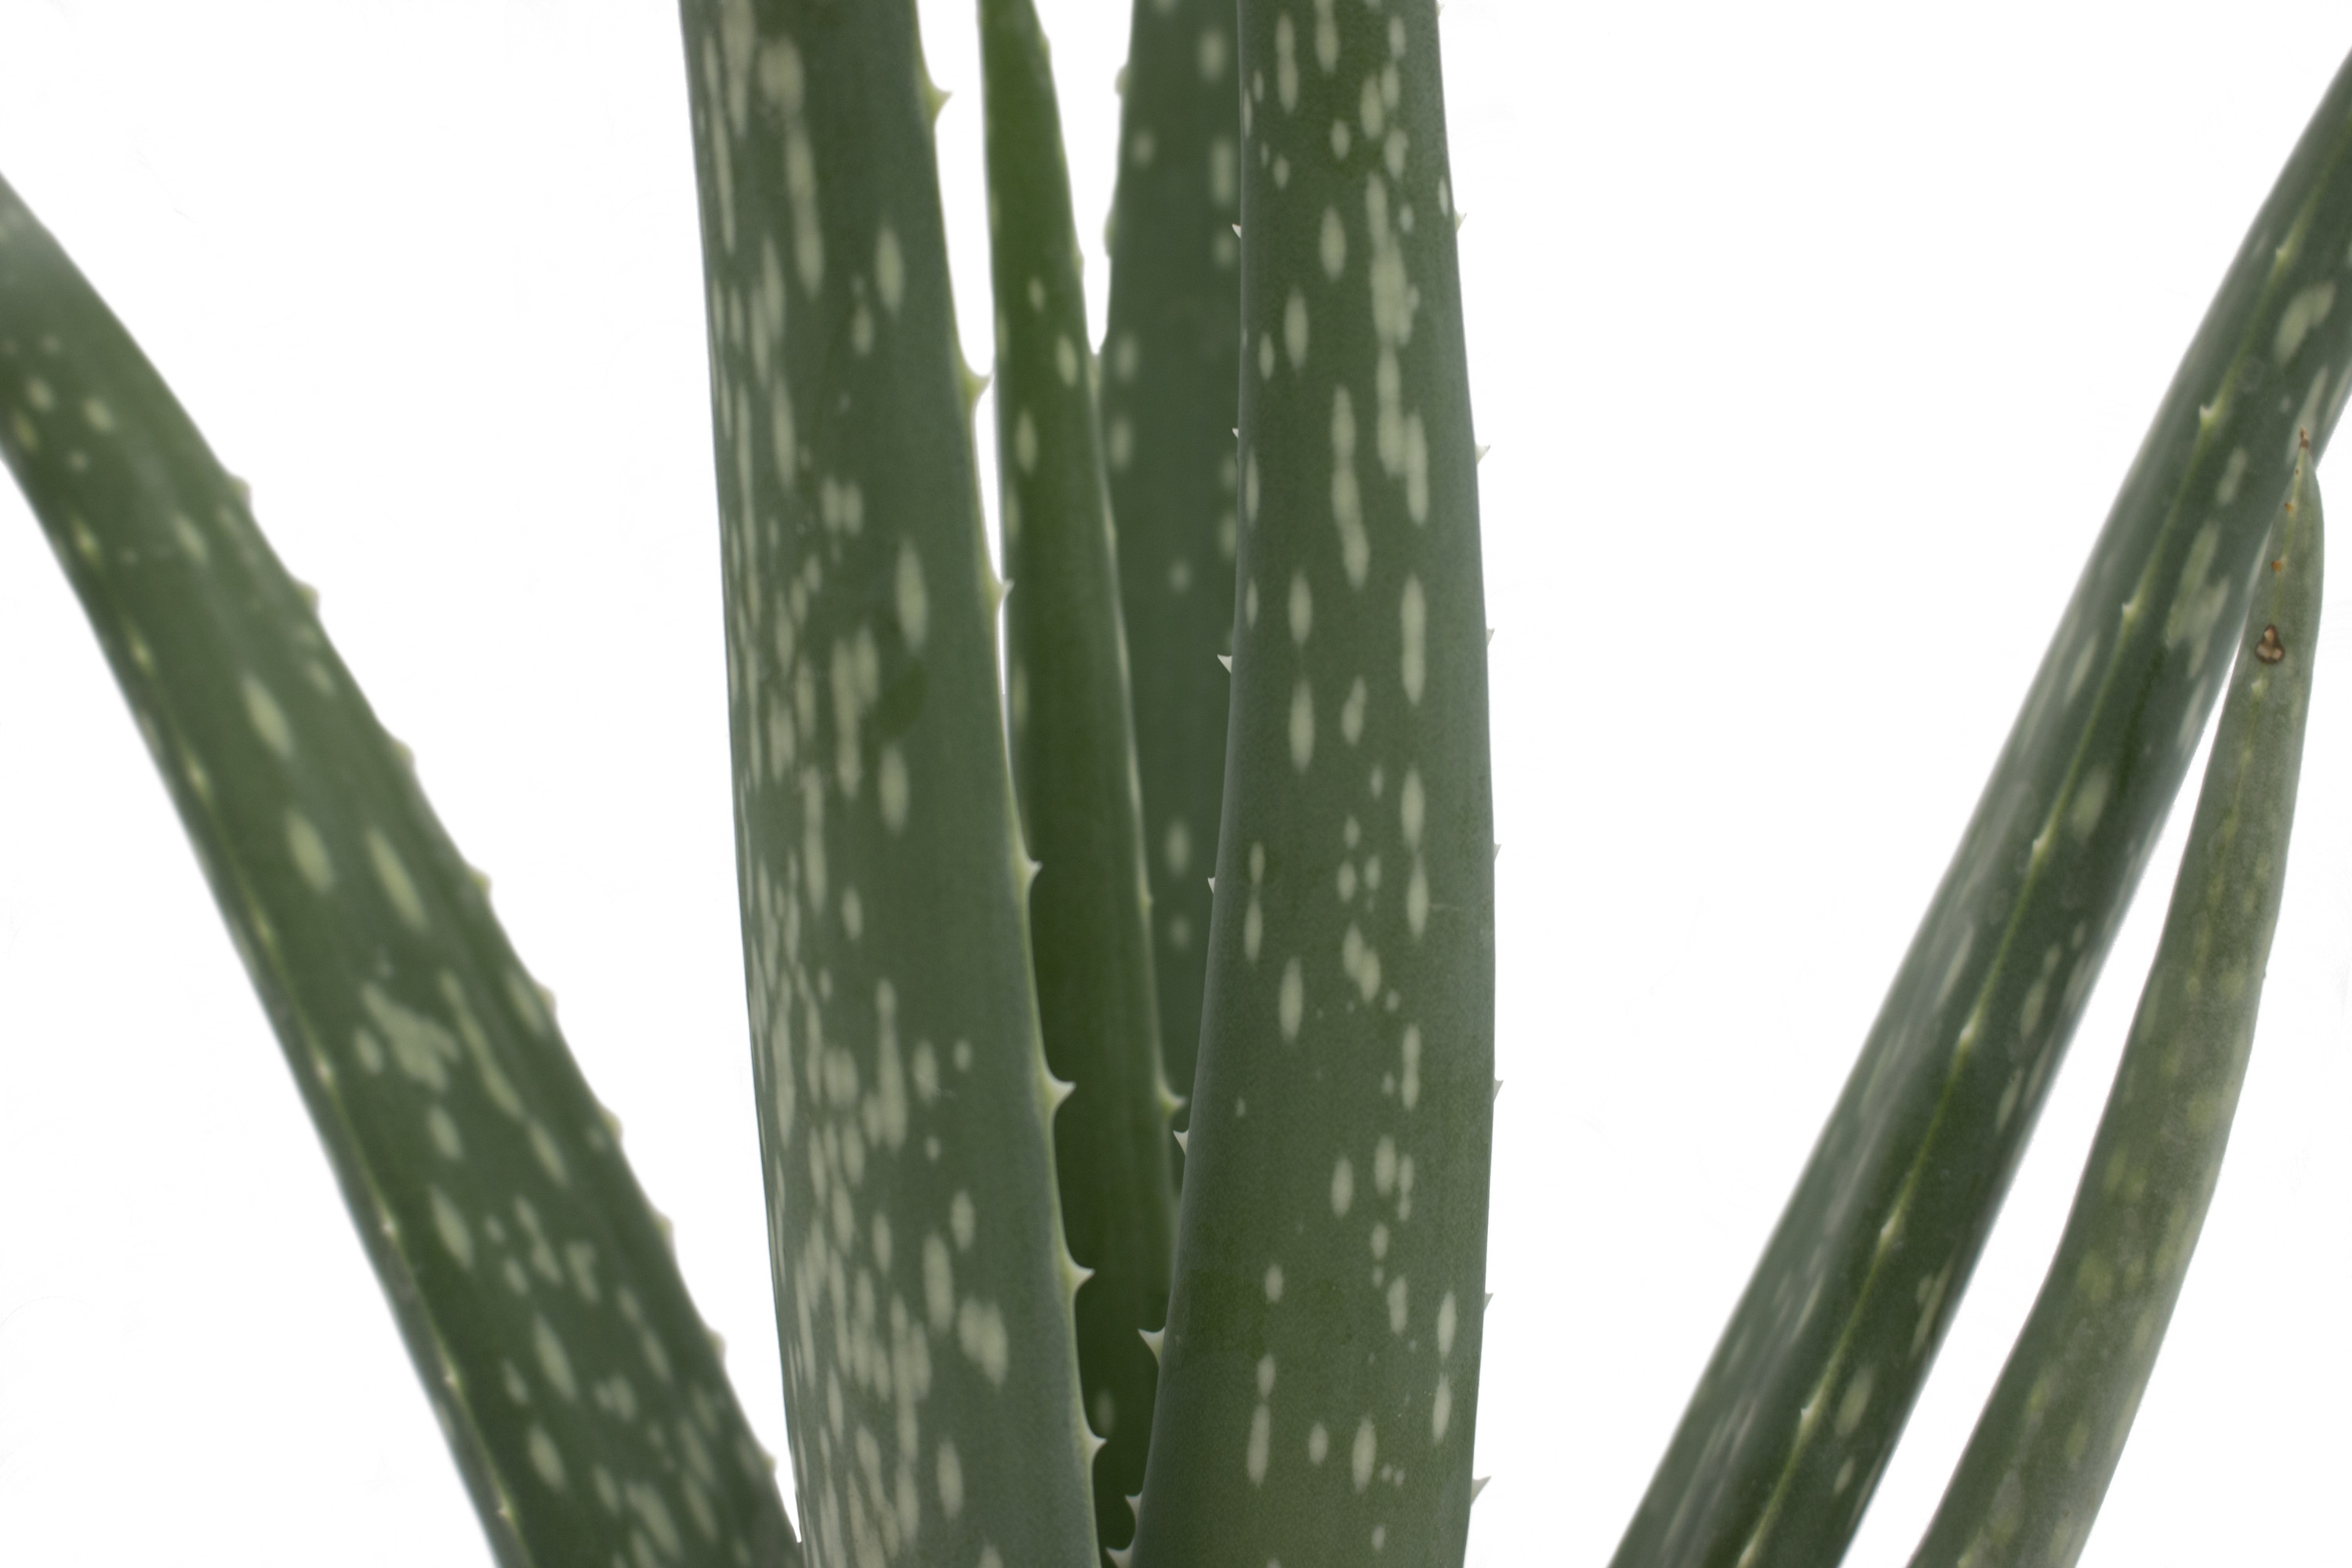 Costa Farms Desert Escape Live Indoor 7in. Tall Green Aloe Vera; Bright, Direct Sunlight Plant in 4in. Grower Pot - image 4 of 11